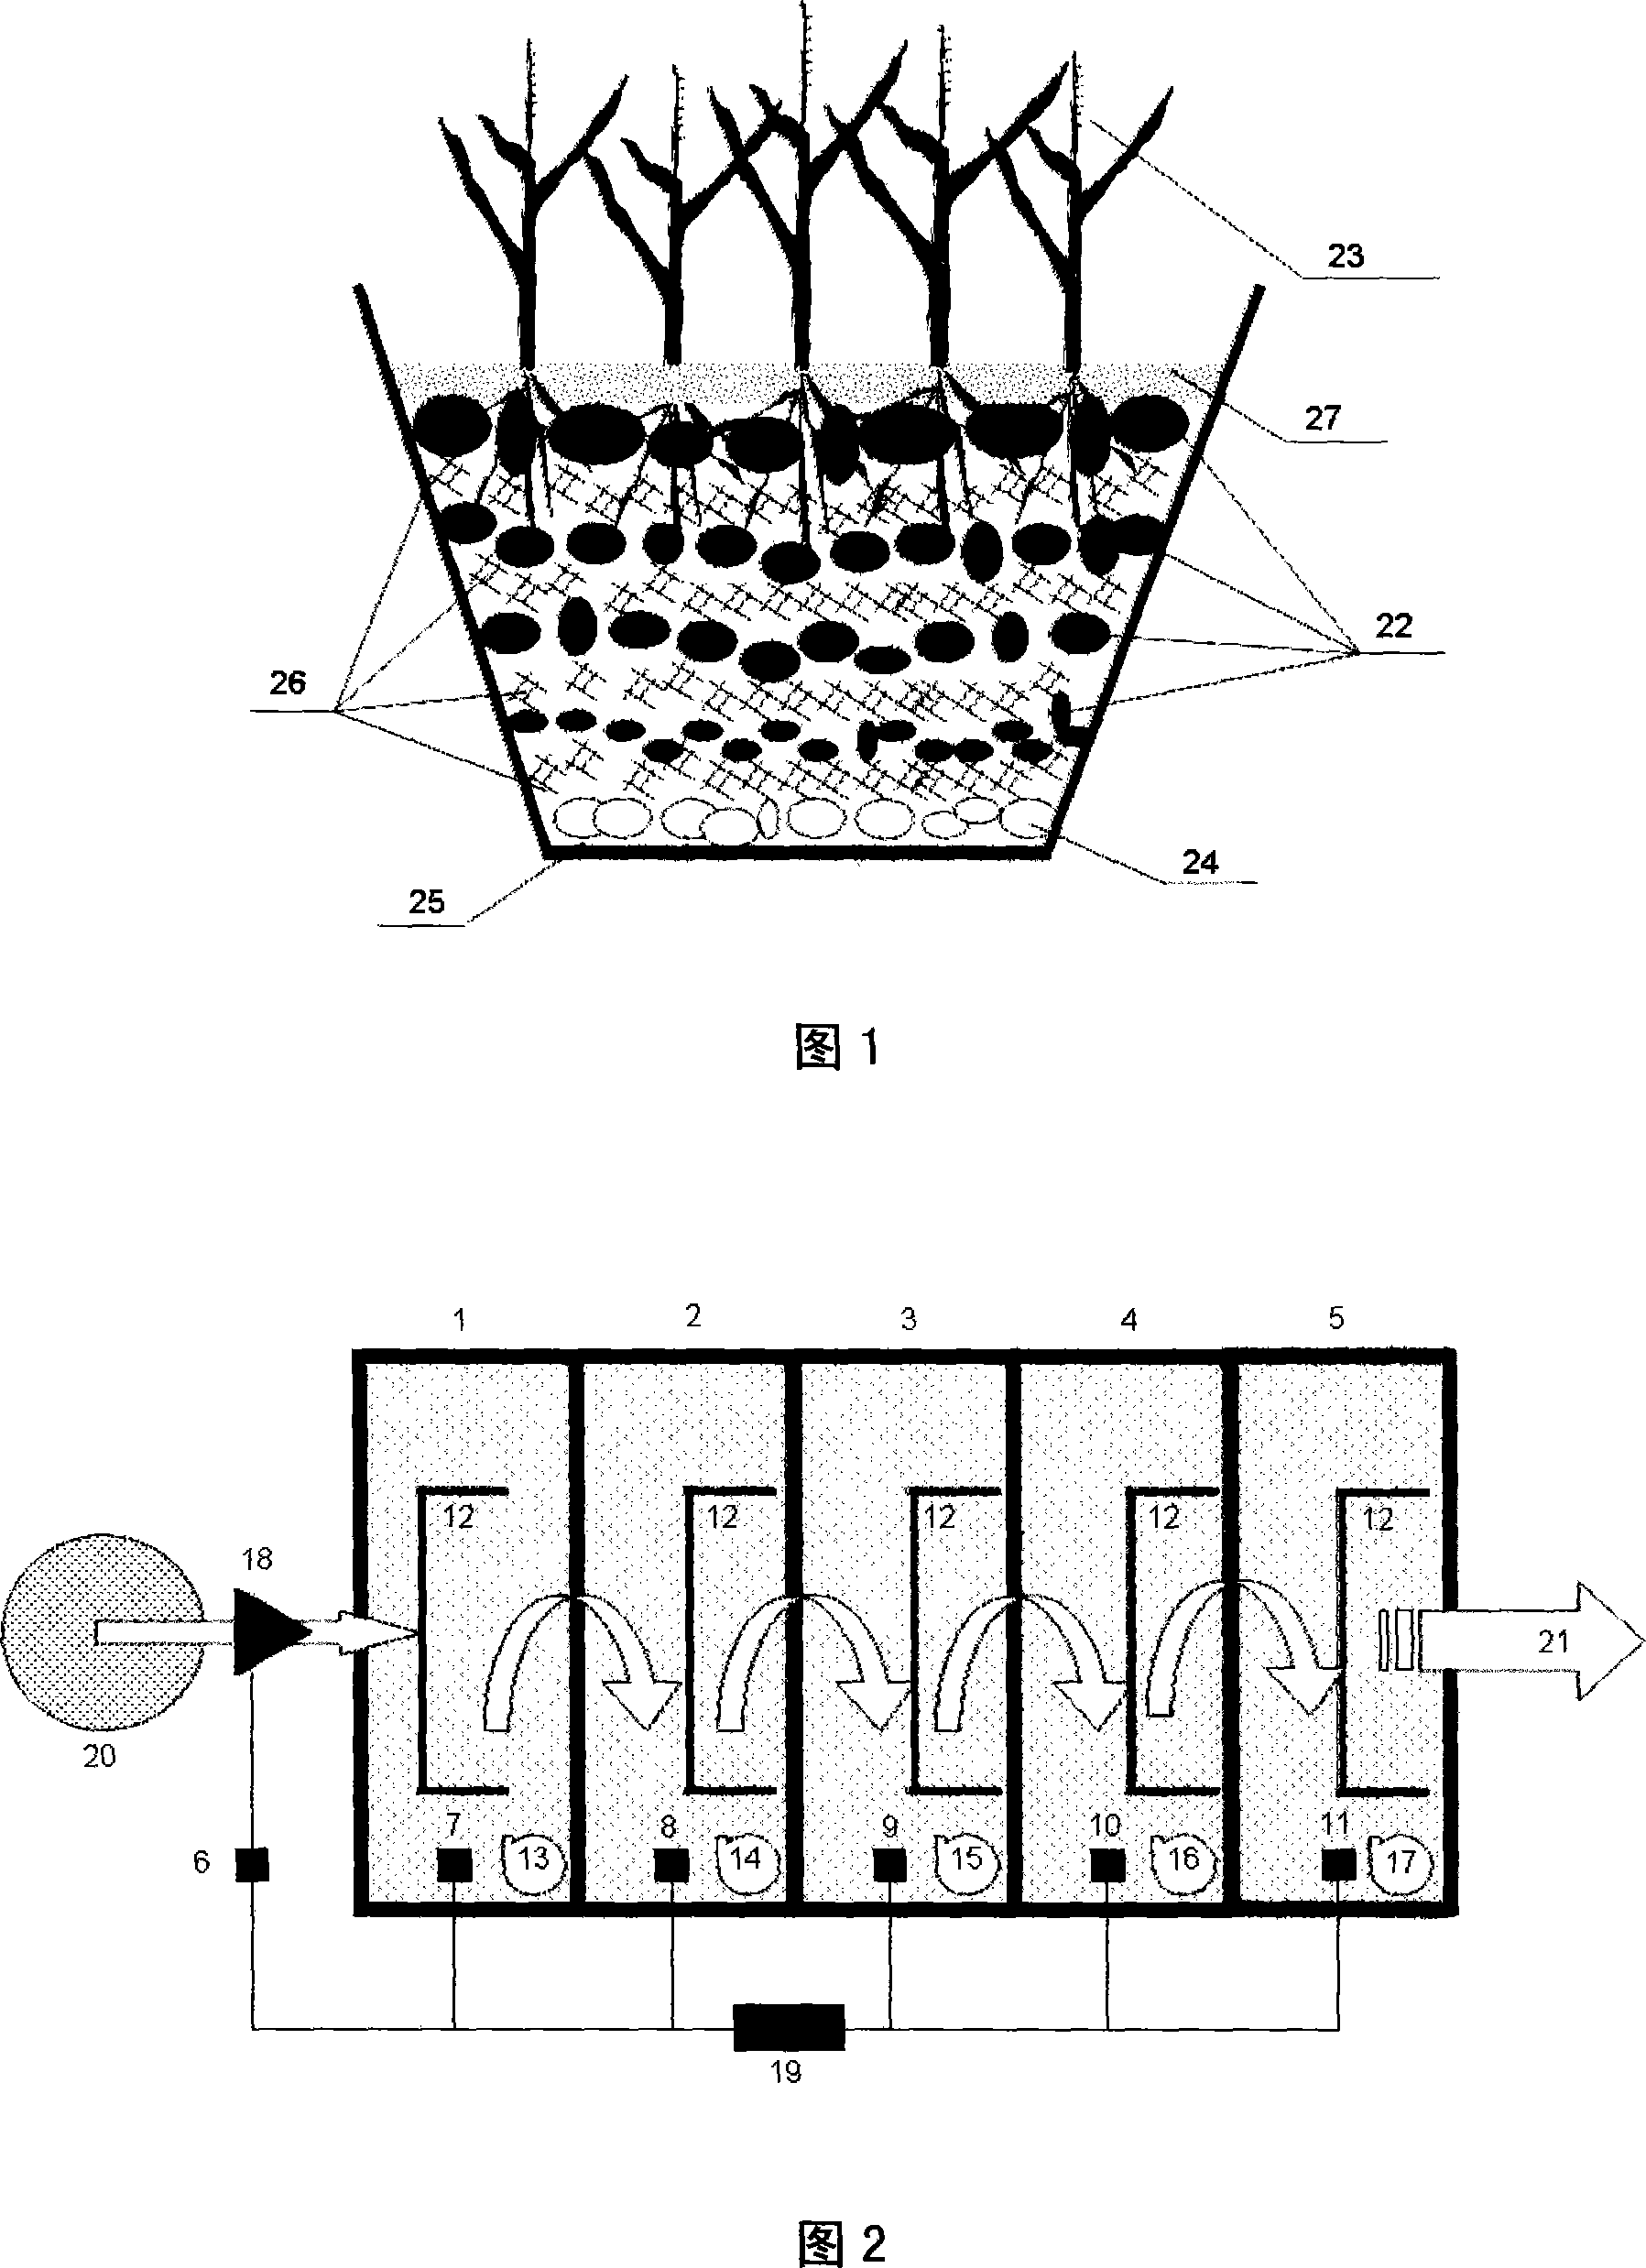 Enhanced compounded mix multi-stage alternate wetland sewage treating process and apparatus thereof